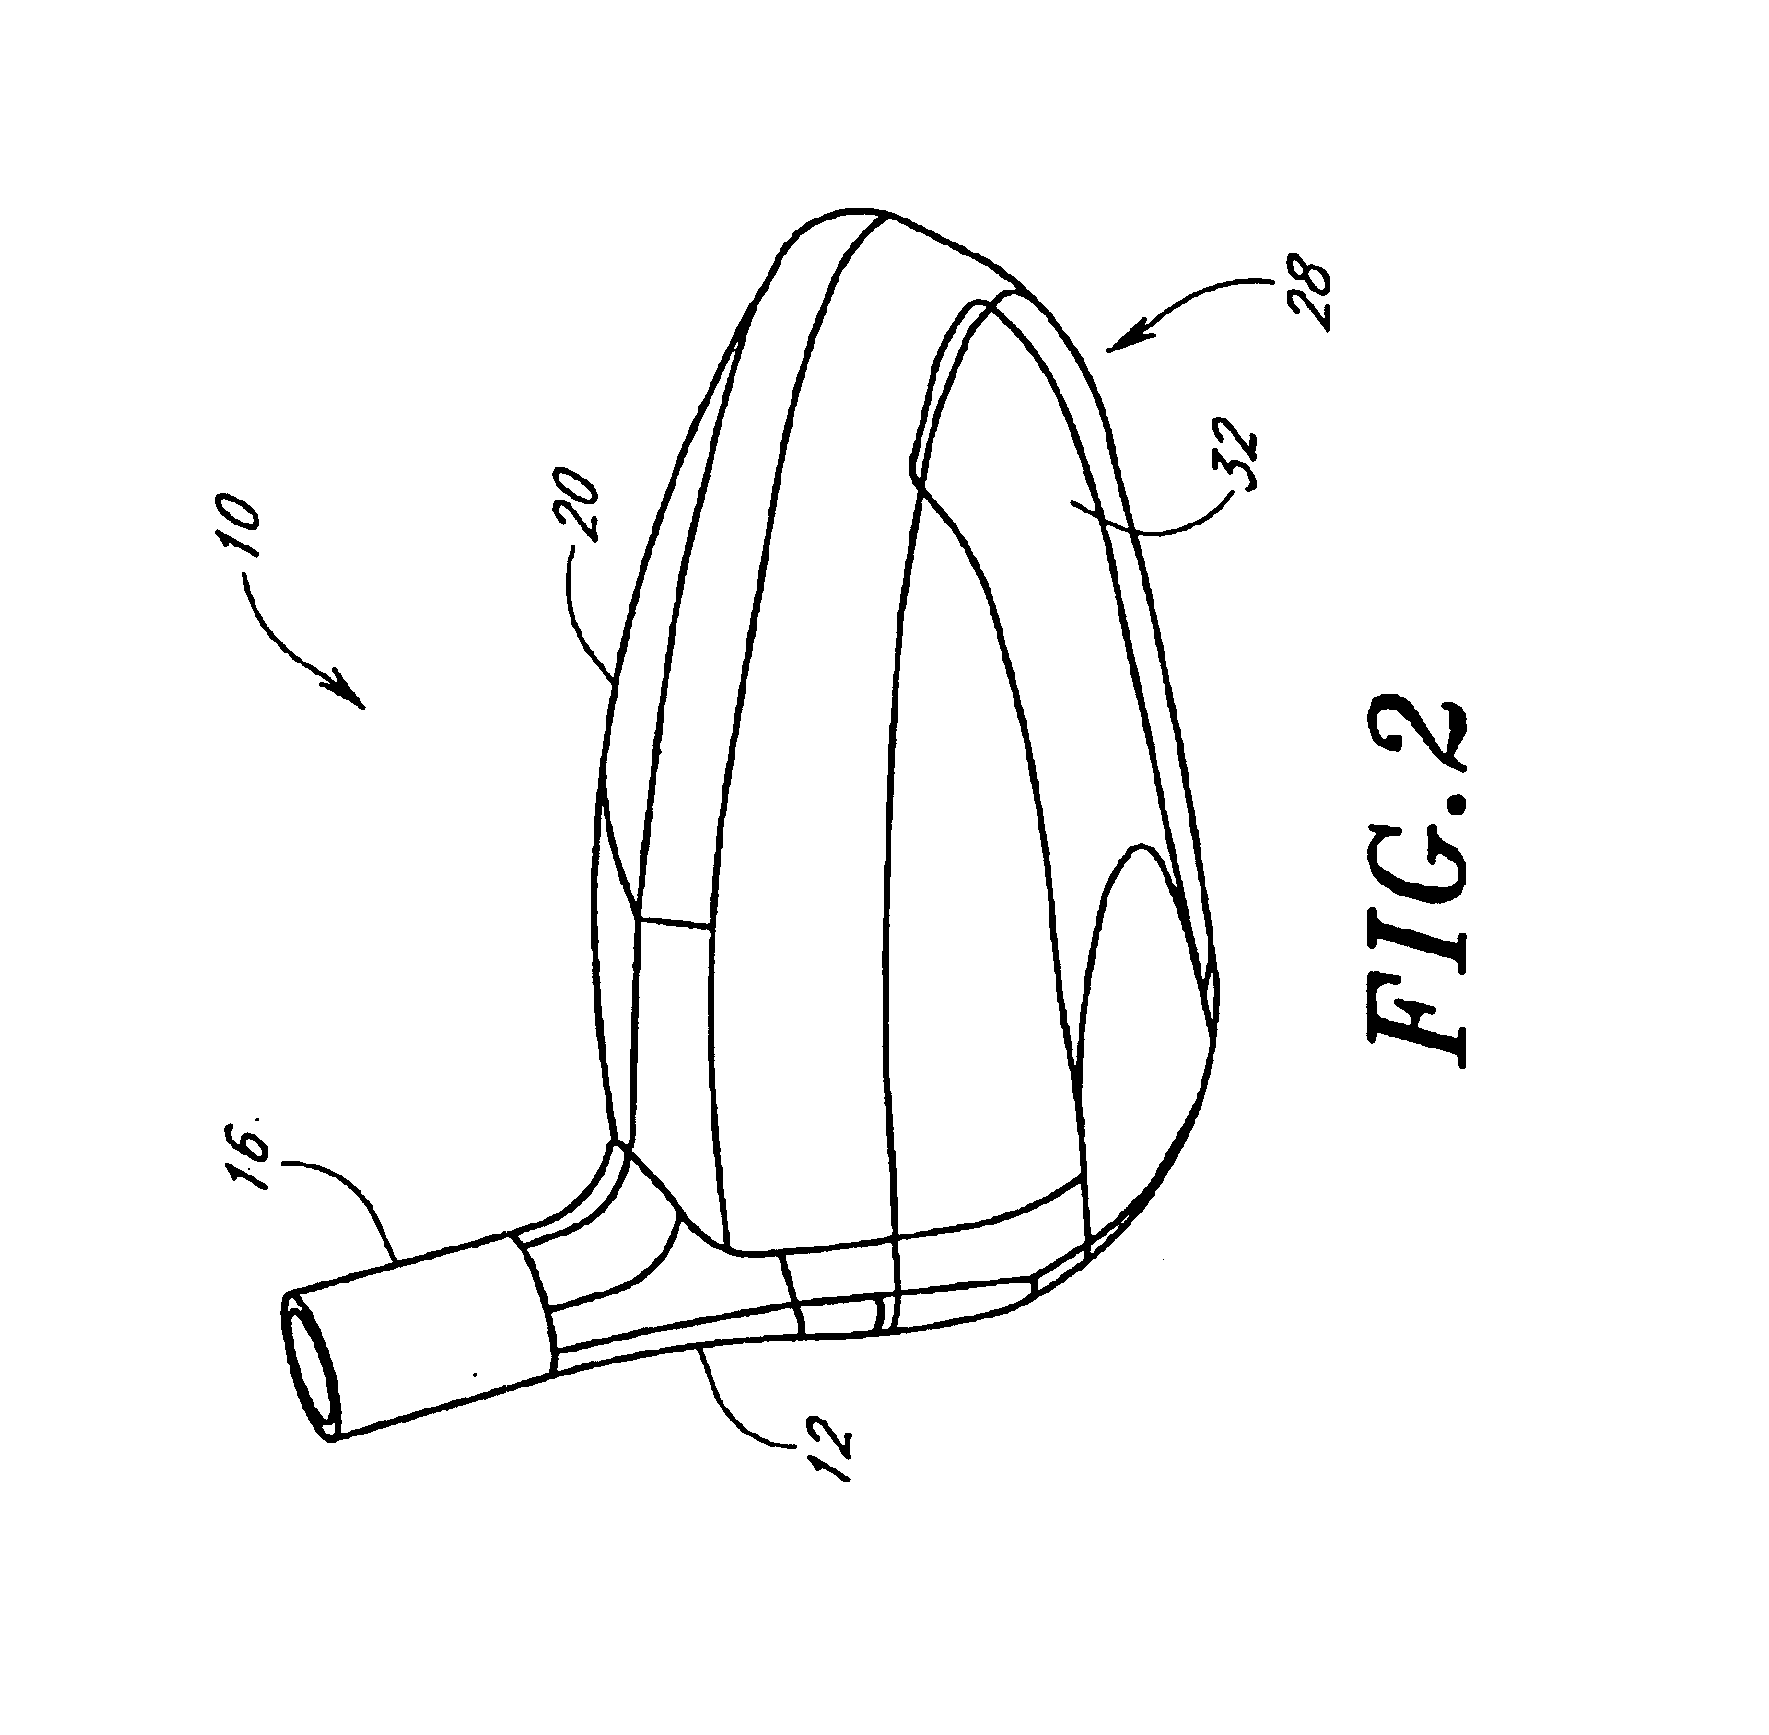 Method for manufacturing and golf club head